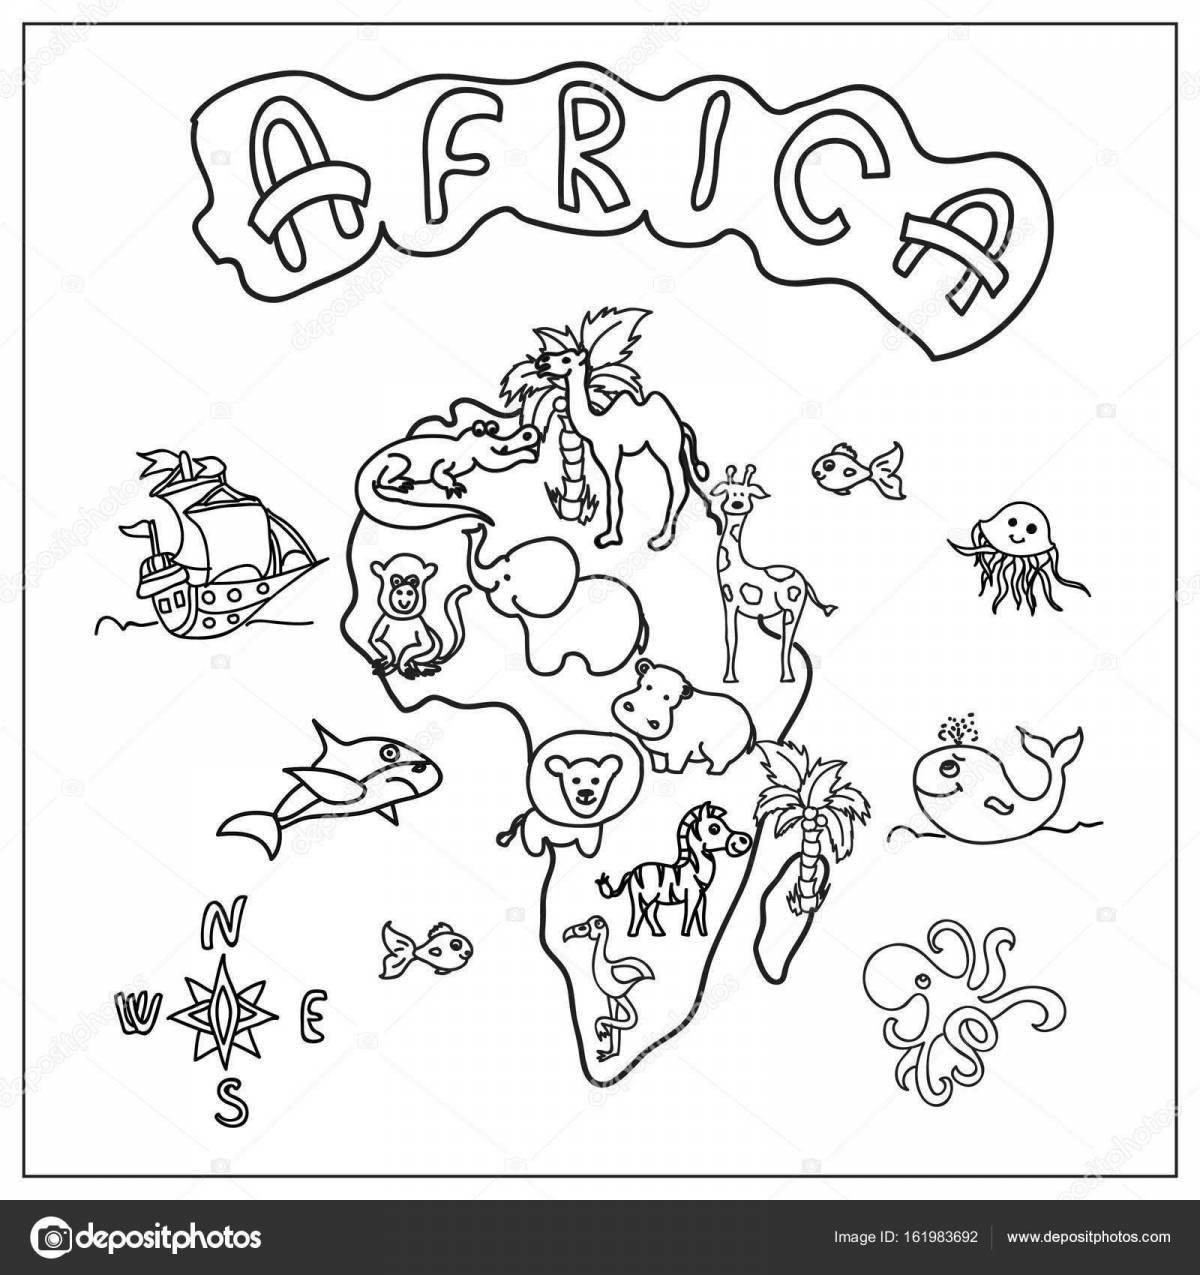 Coloring pages continents for kids